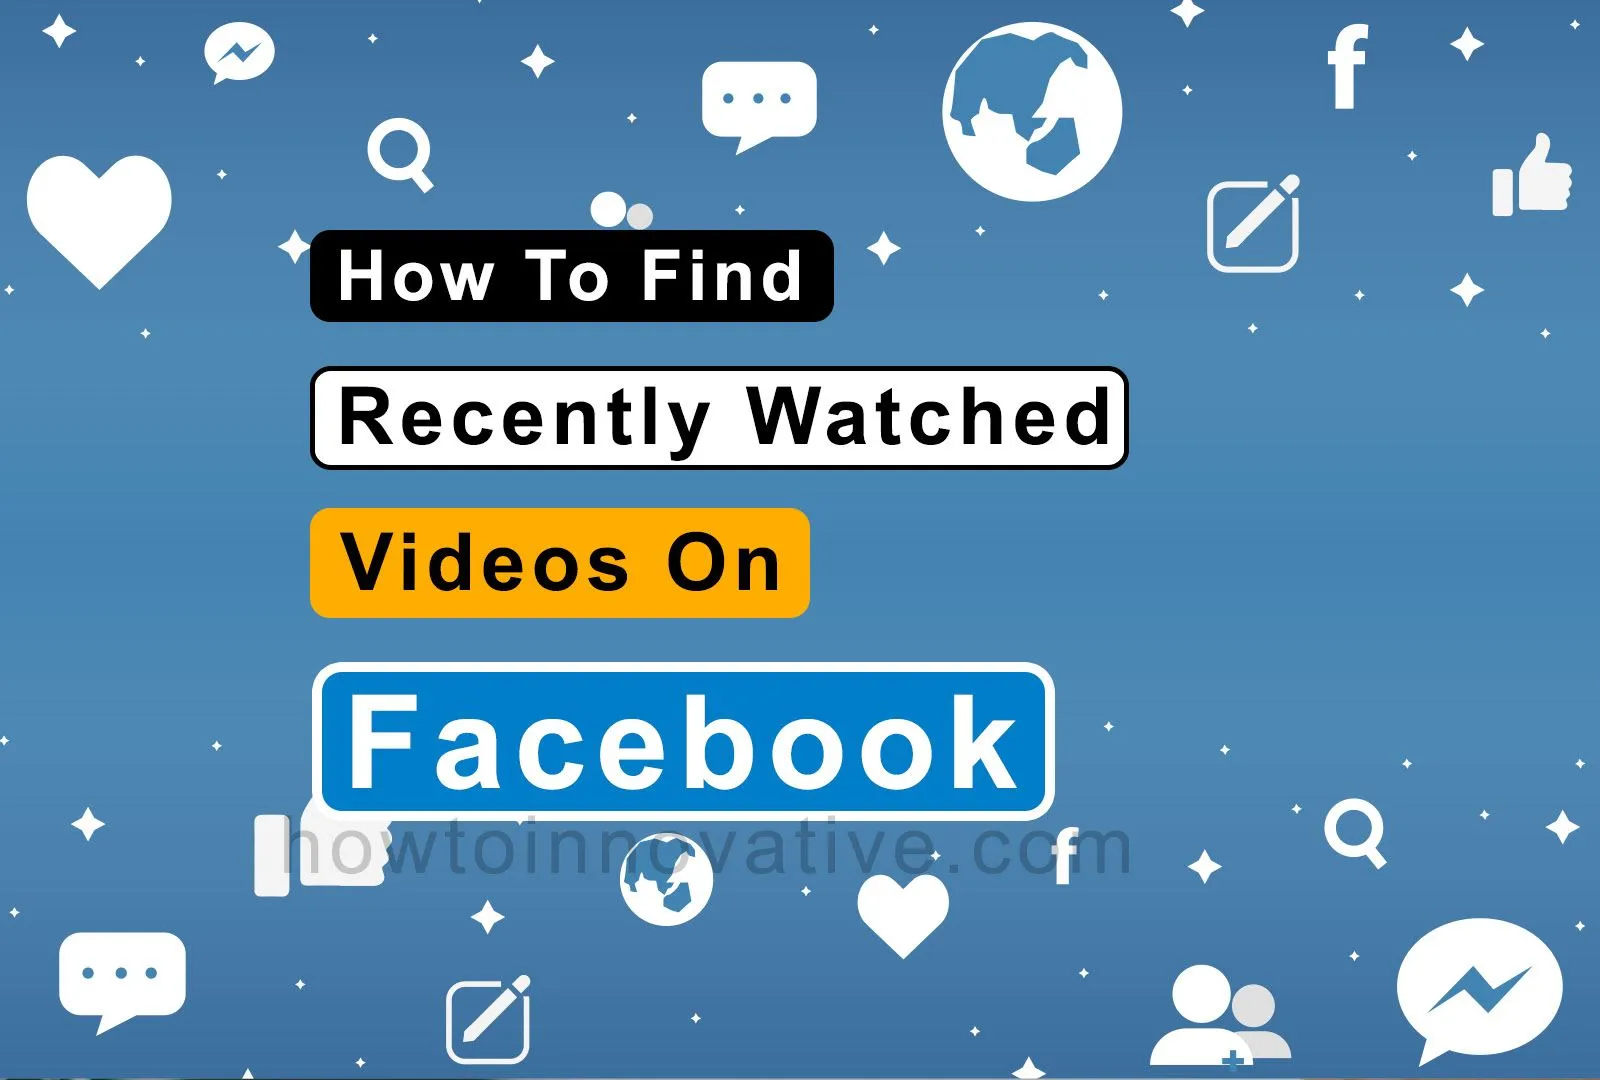 How To Find Recently Watched Videos On Facebook